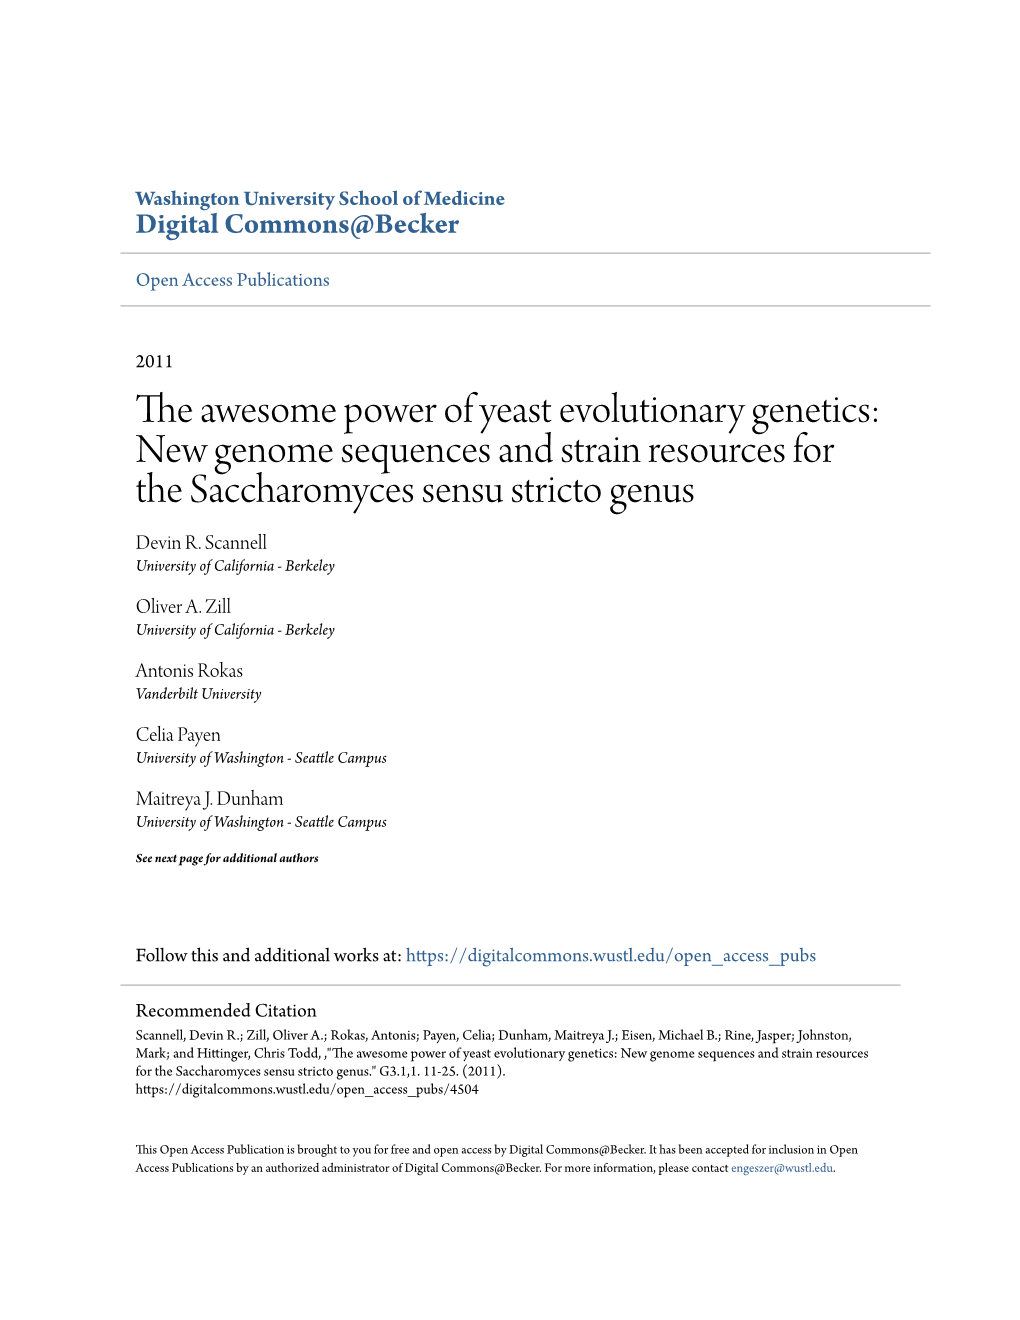 New Genome Sequences and Strain Resources for the Saccharomyces Sensu Stricto Genus Devin R